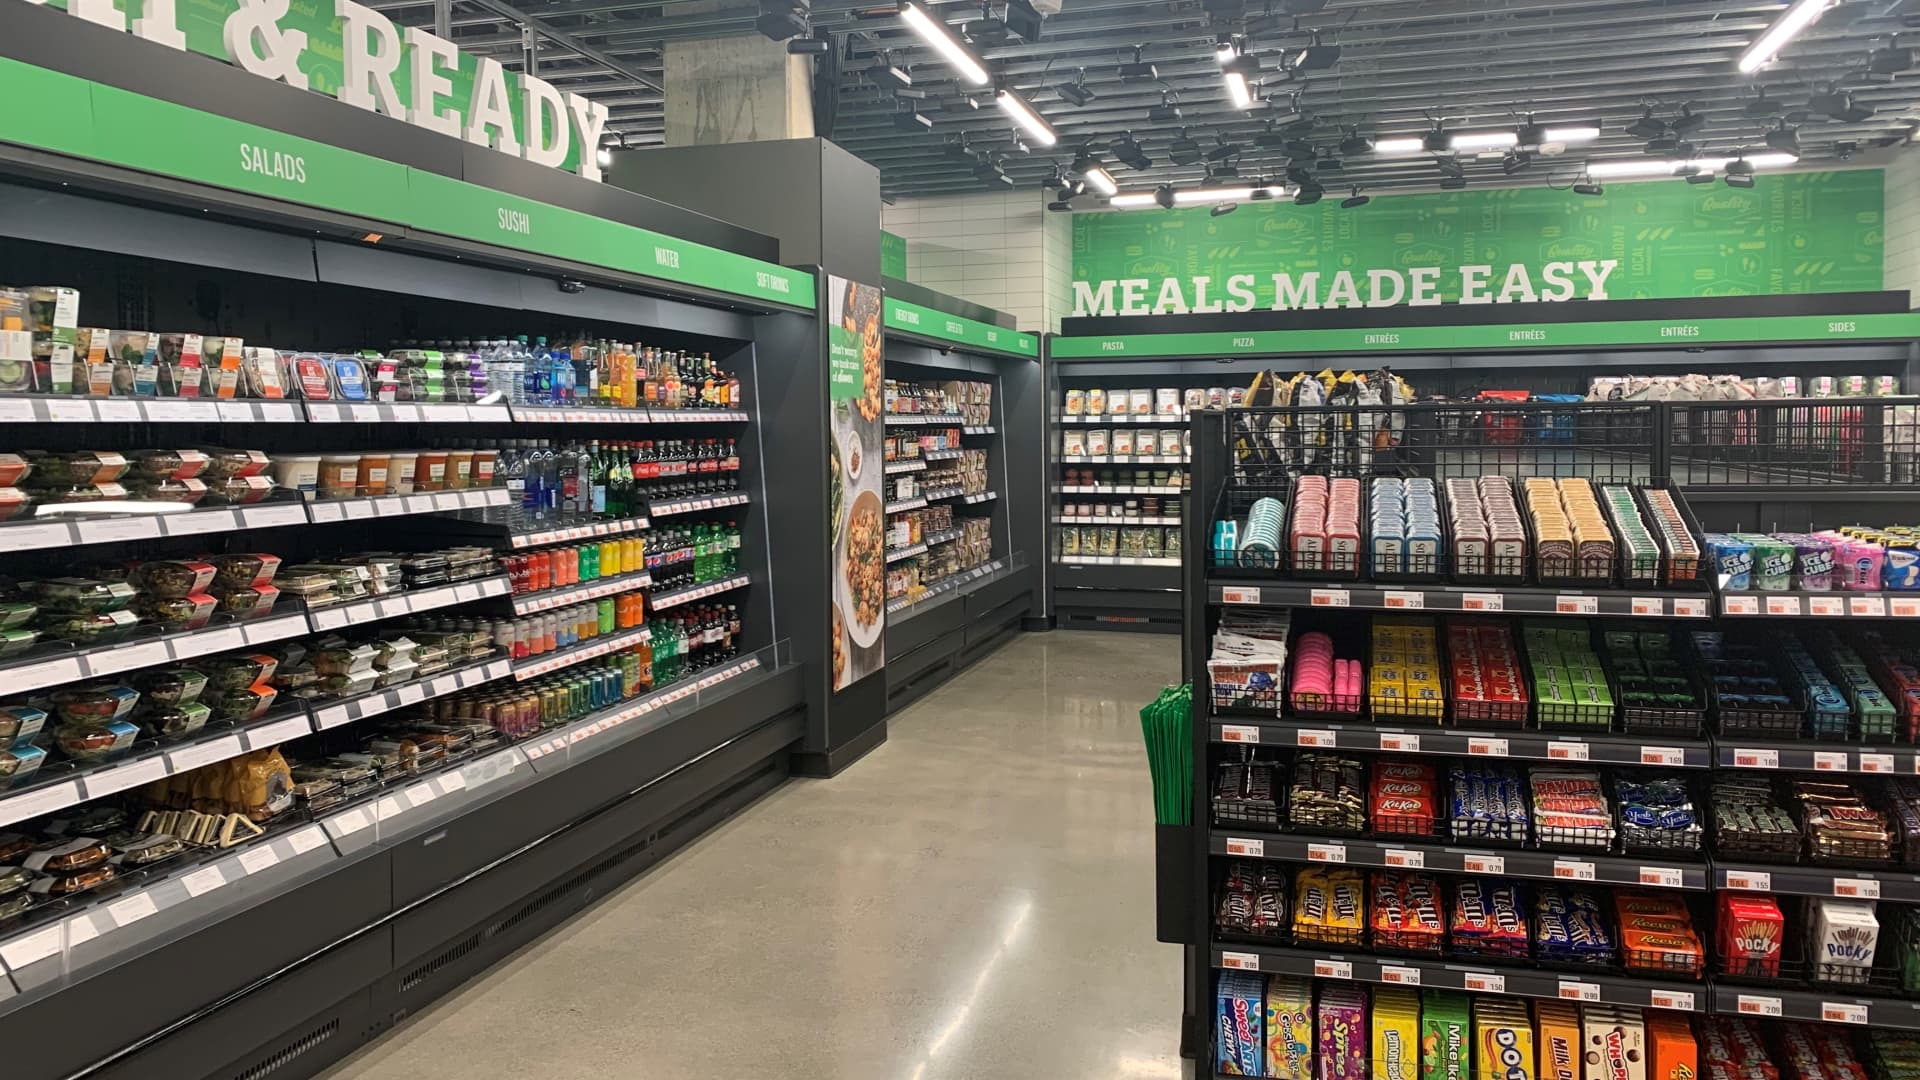 The grab-and-go options in the space are more for families looking for a dinner solution, whereas Amazon Go stores are focused on serving breakfast and lunch needs.